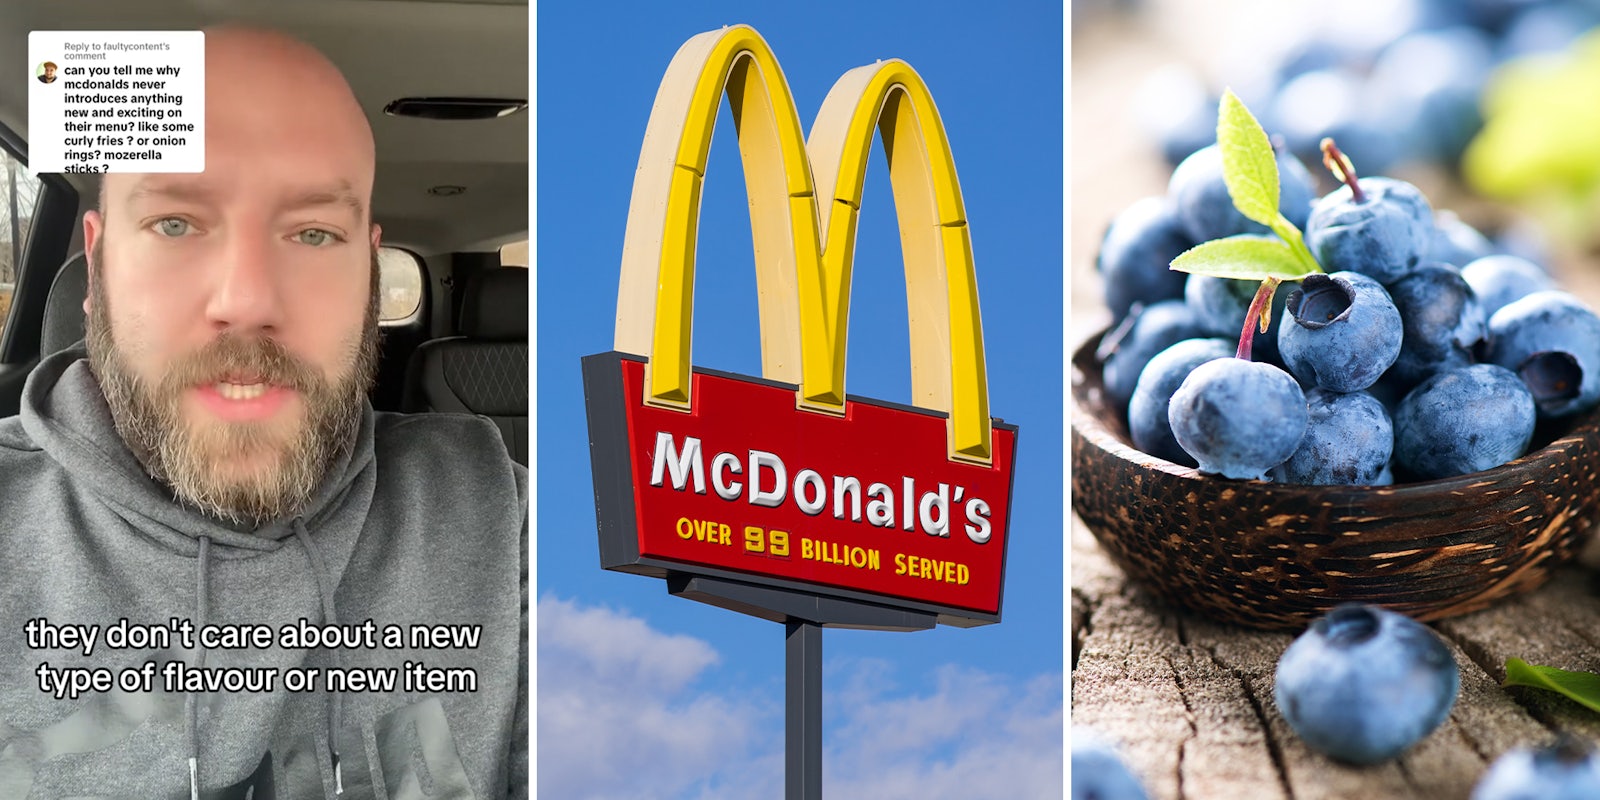 former McDonald's corporate chef explains why the menu never introduces 'something new'